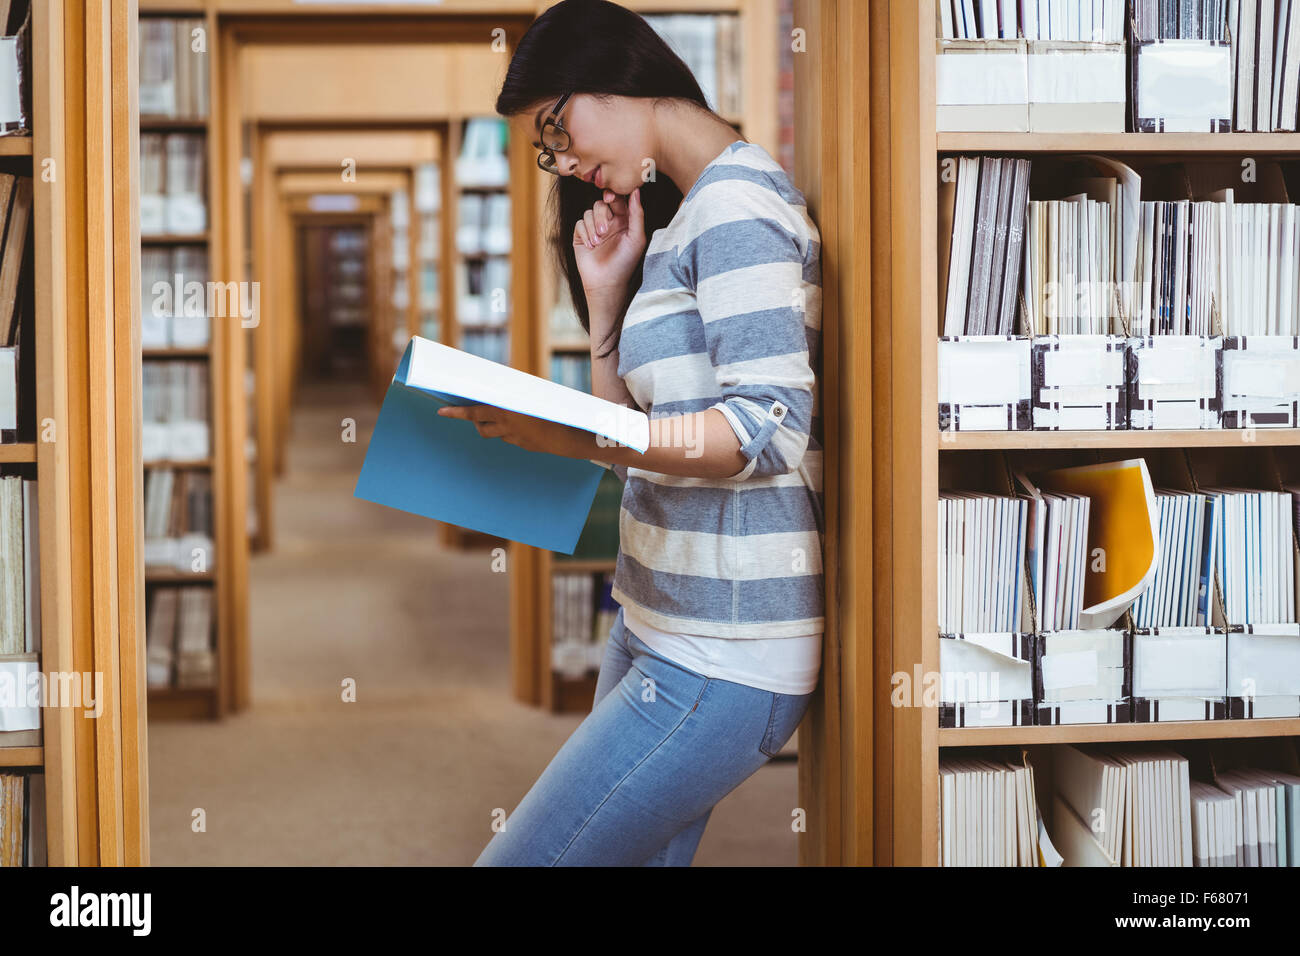 Focused student leaning against bookshelves and reading a book in library Stock Photo